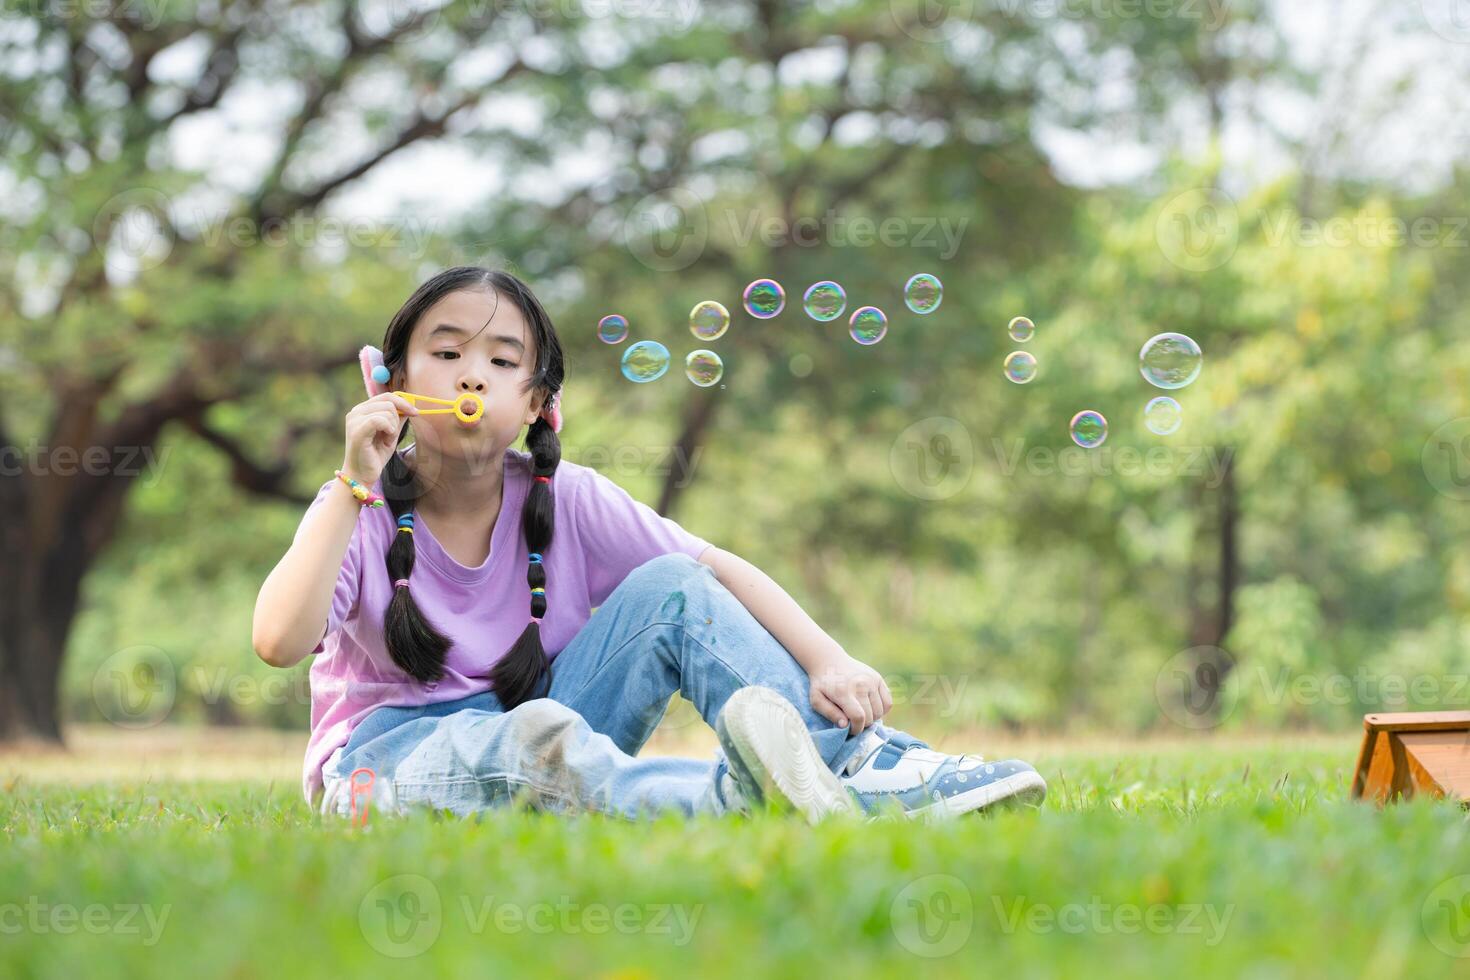 Girl sitting in the park with blowing air bubble, Surrounded by greenery and nature photo